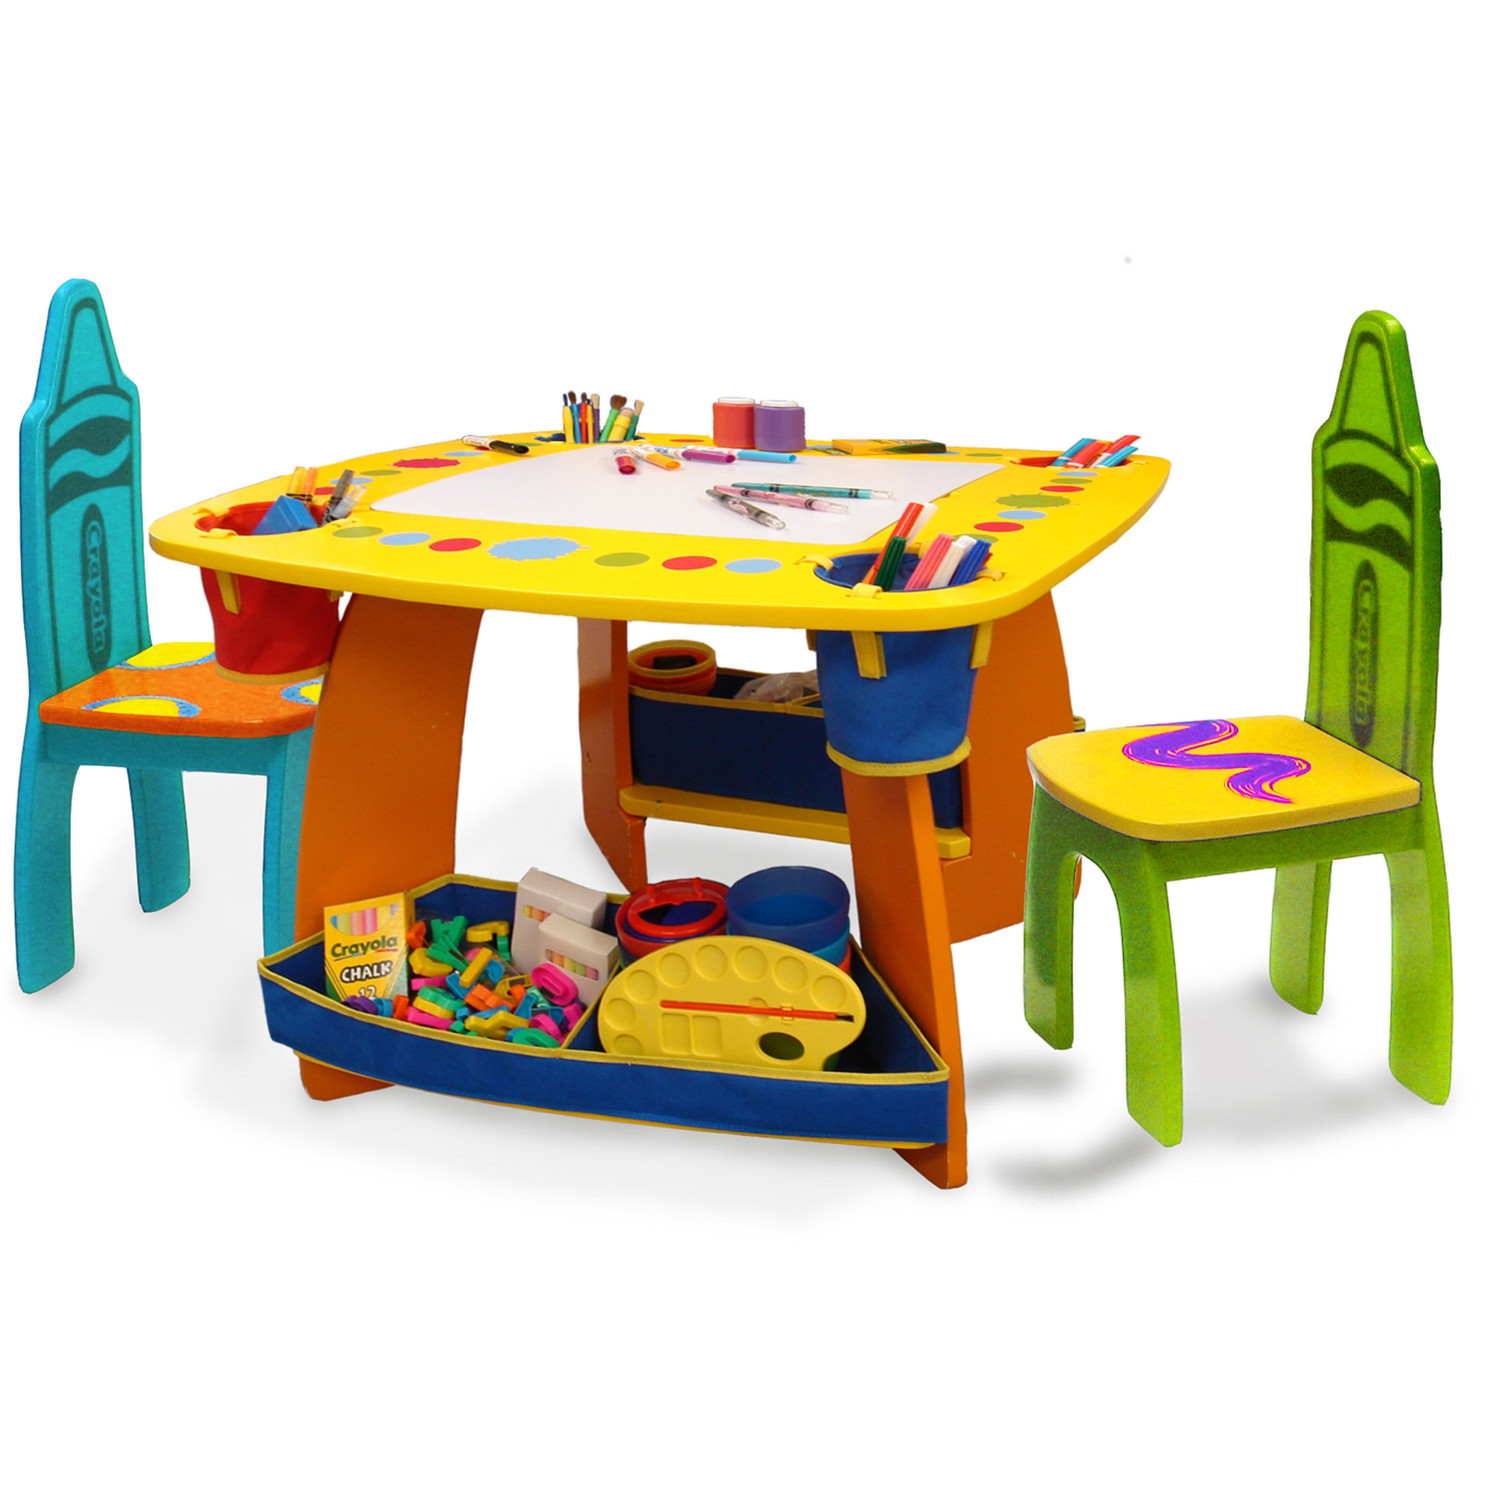 Kids Art Table With Storage
 Find the Cutest Art Table for Kids – HomesFeed